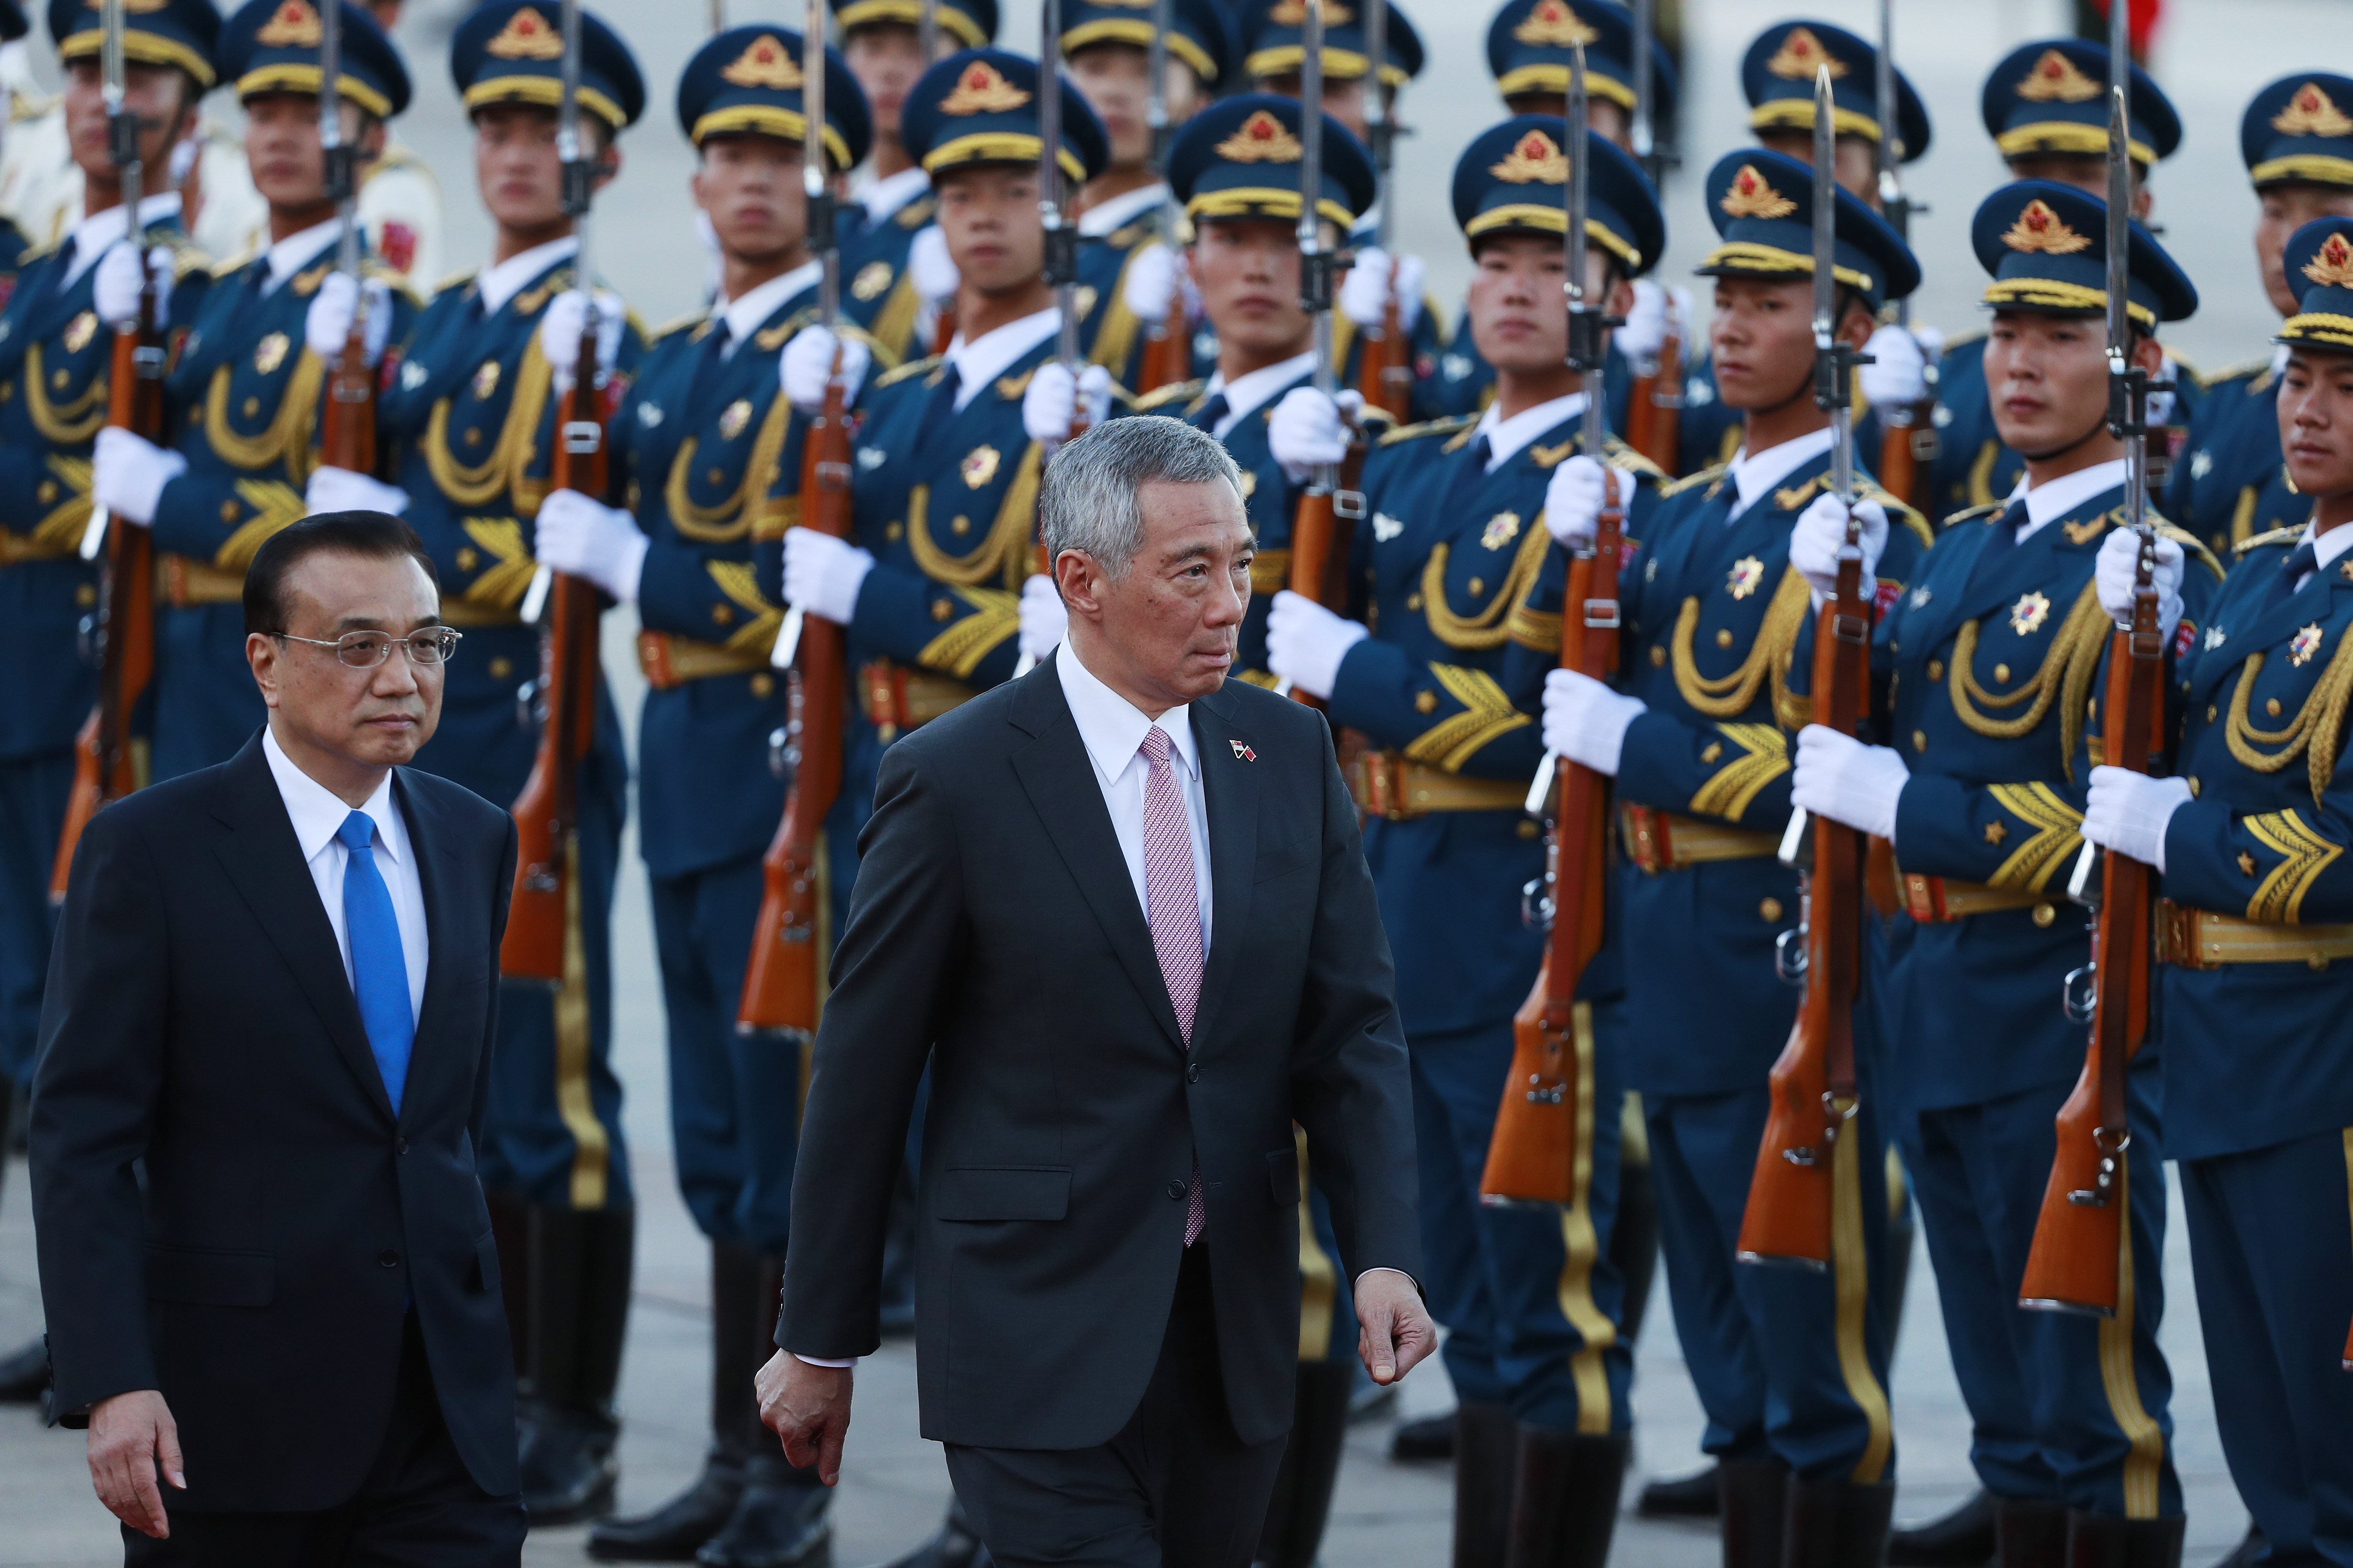 Chinese Premier Li Keqiang (left) and Singaporean Prime Minister Lee Hsien Loong during a ceremony in Beijing in September. Observers said Lee’s visit suggested relations between the two countries were back on track. Photo: EPA